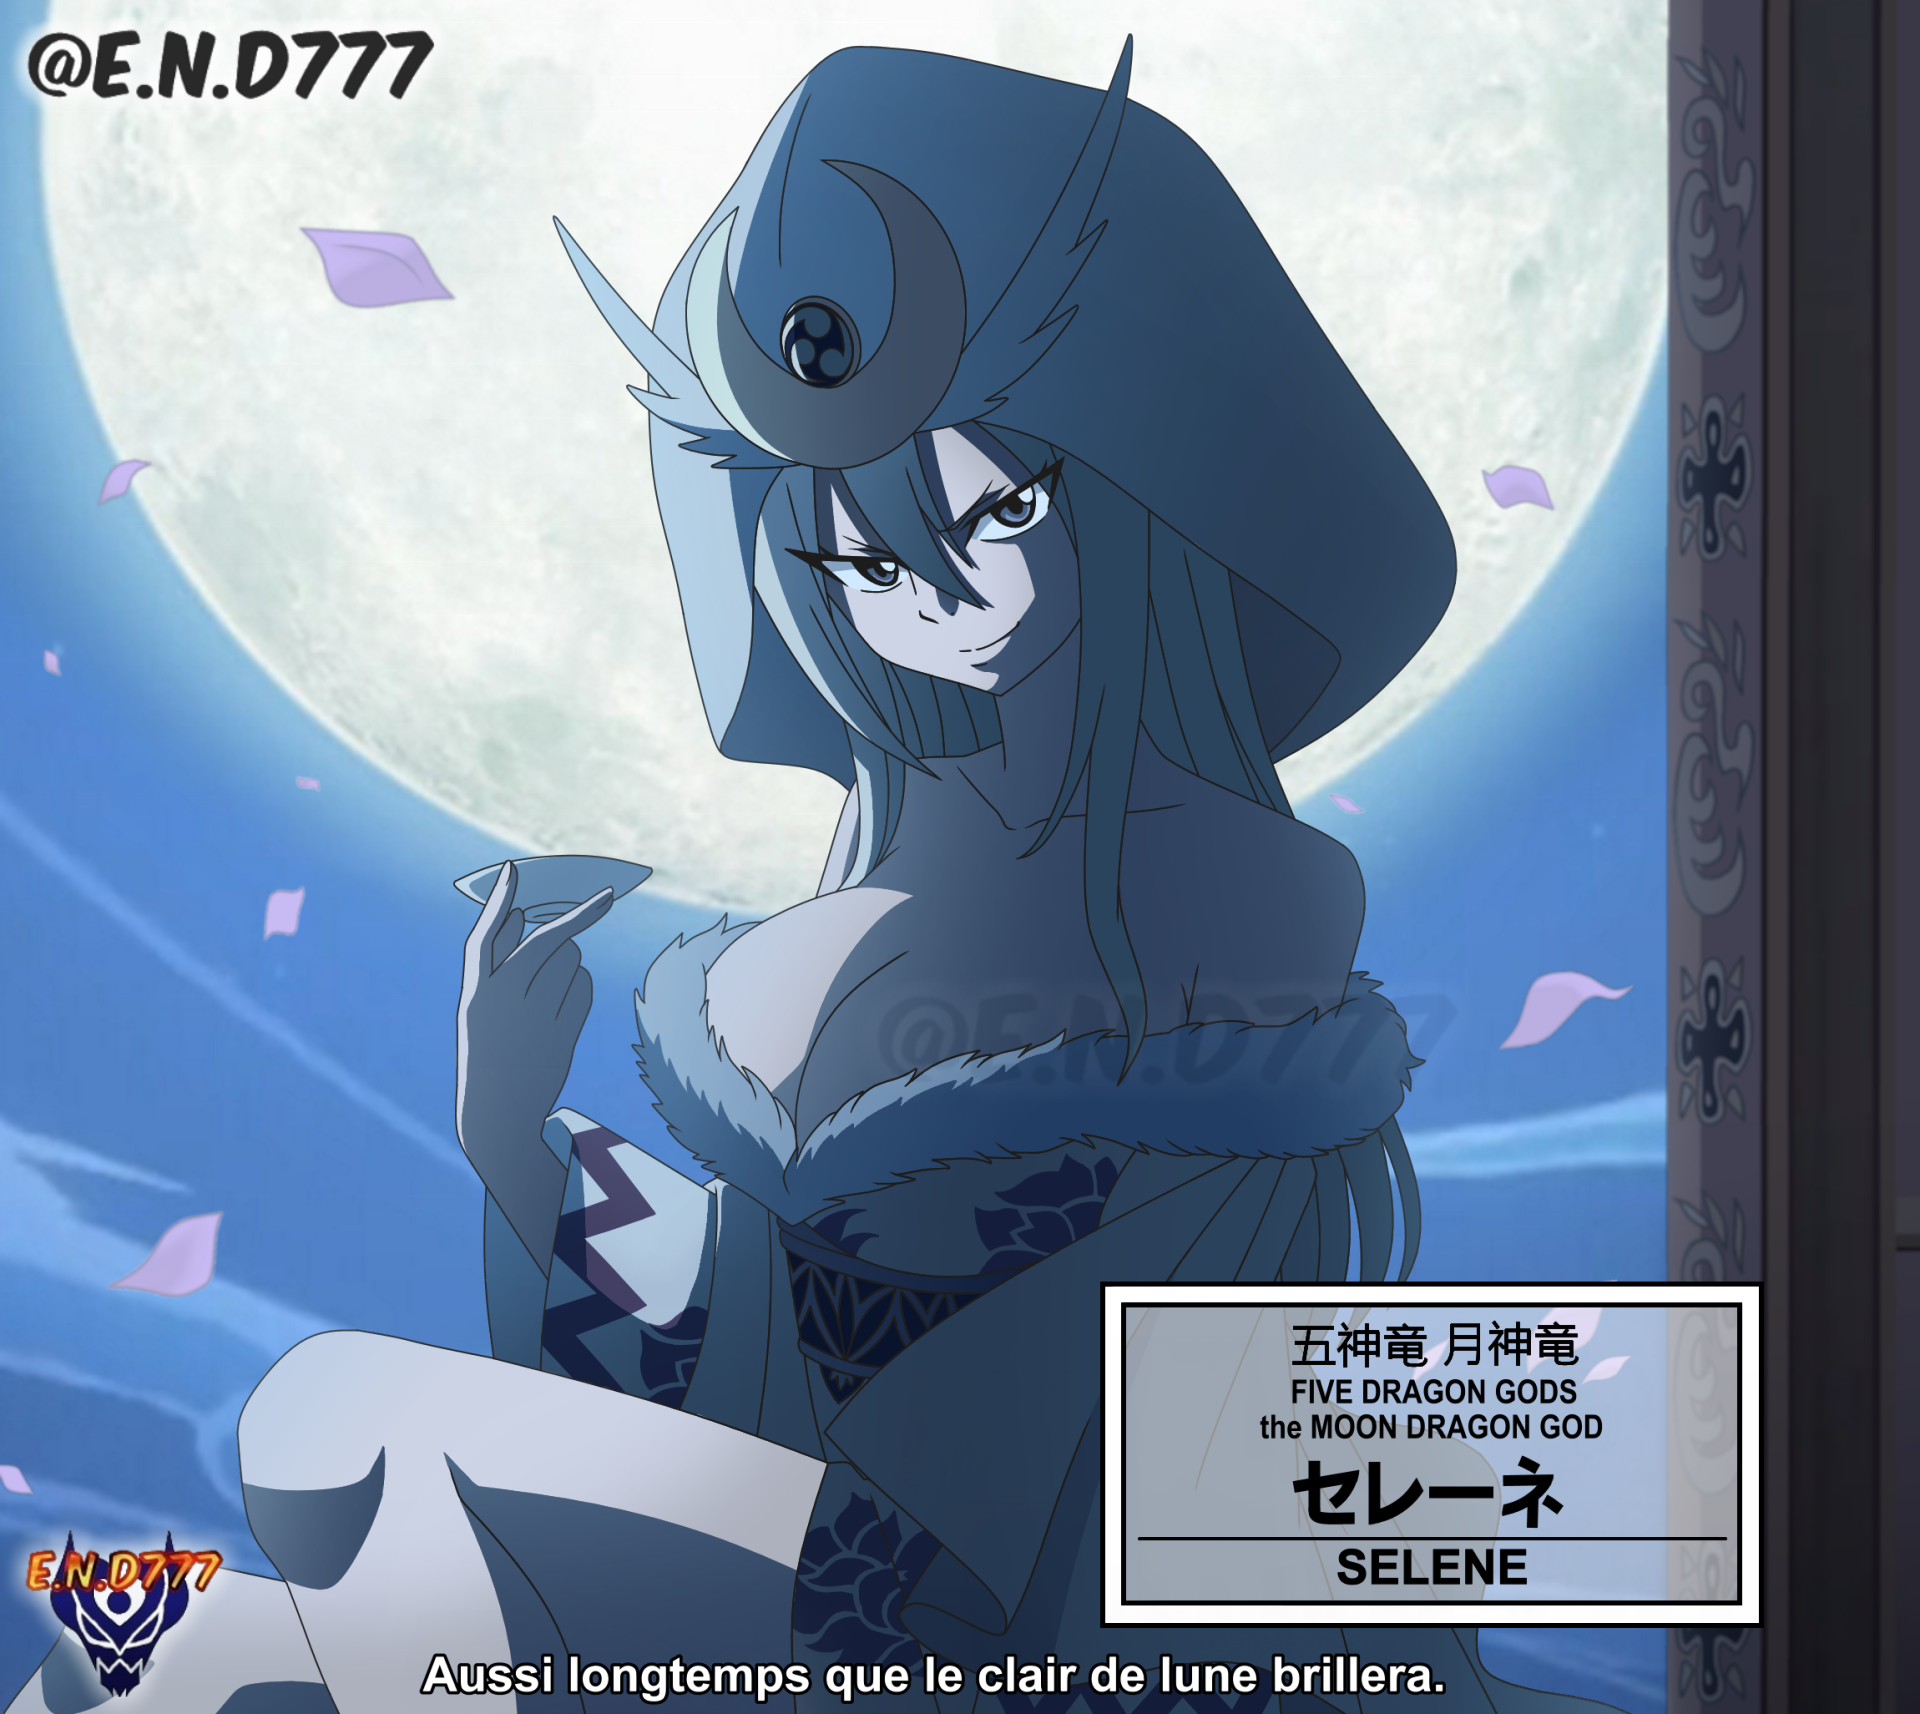 Fairy Tail: 100 Years Quest Release Date Coming Soon – Centurion